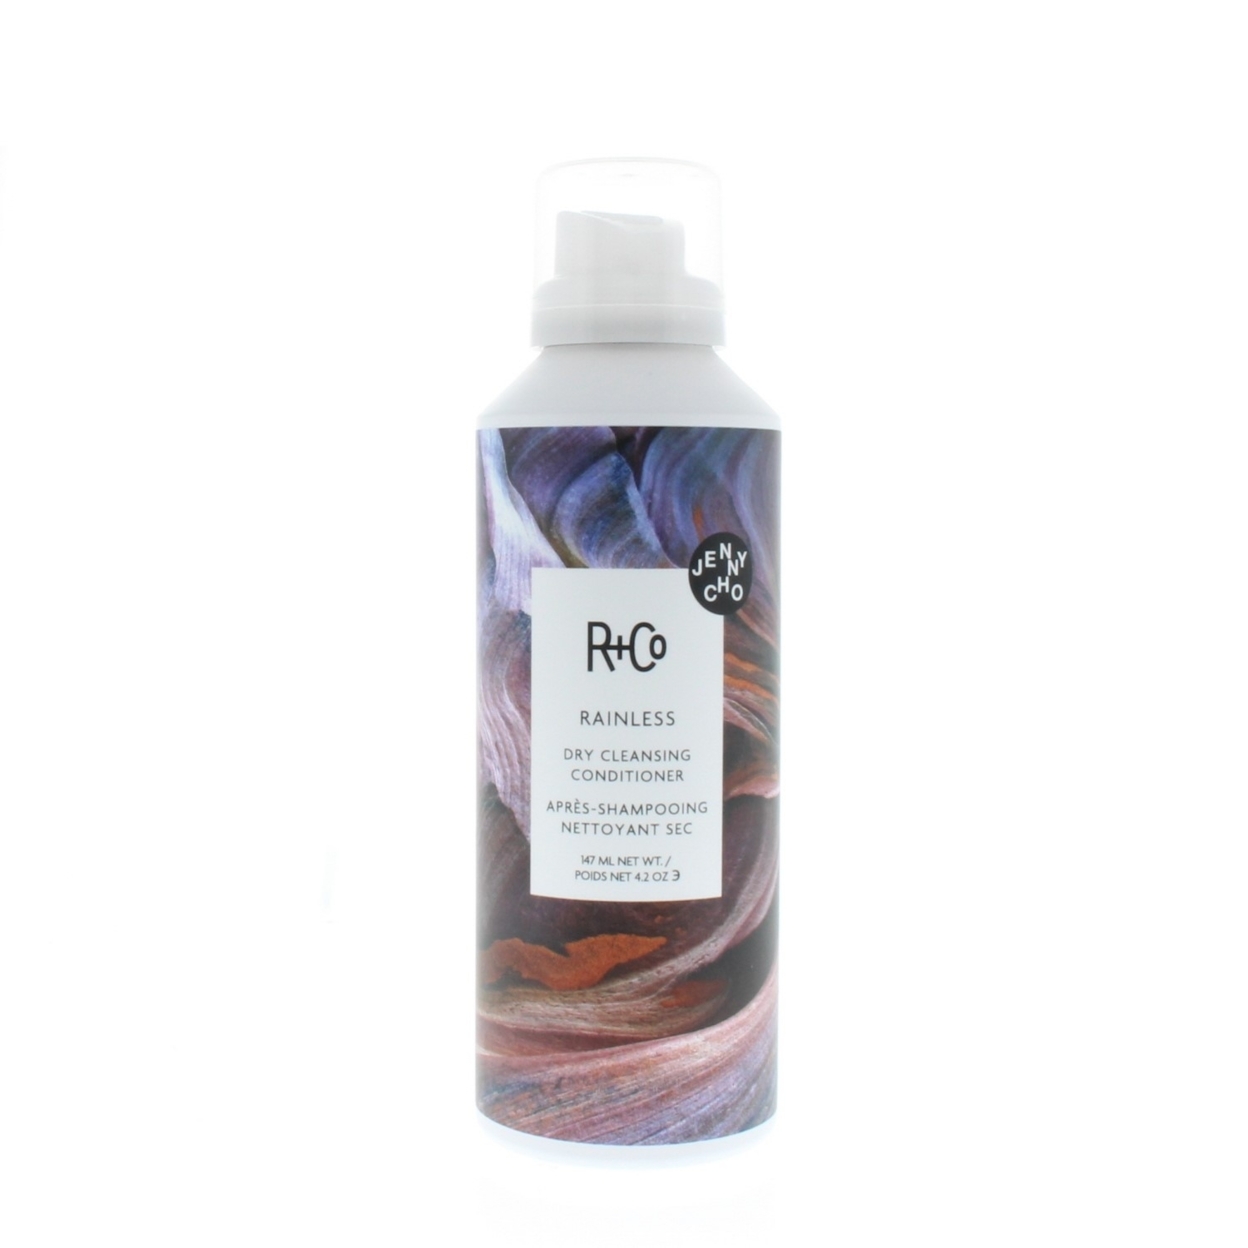 R+Co Rainless Dry Cleansing Conditioner 4.2oz/147ml